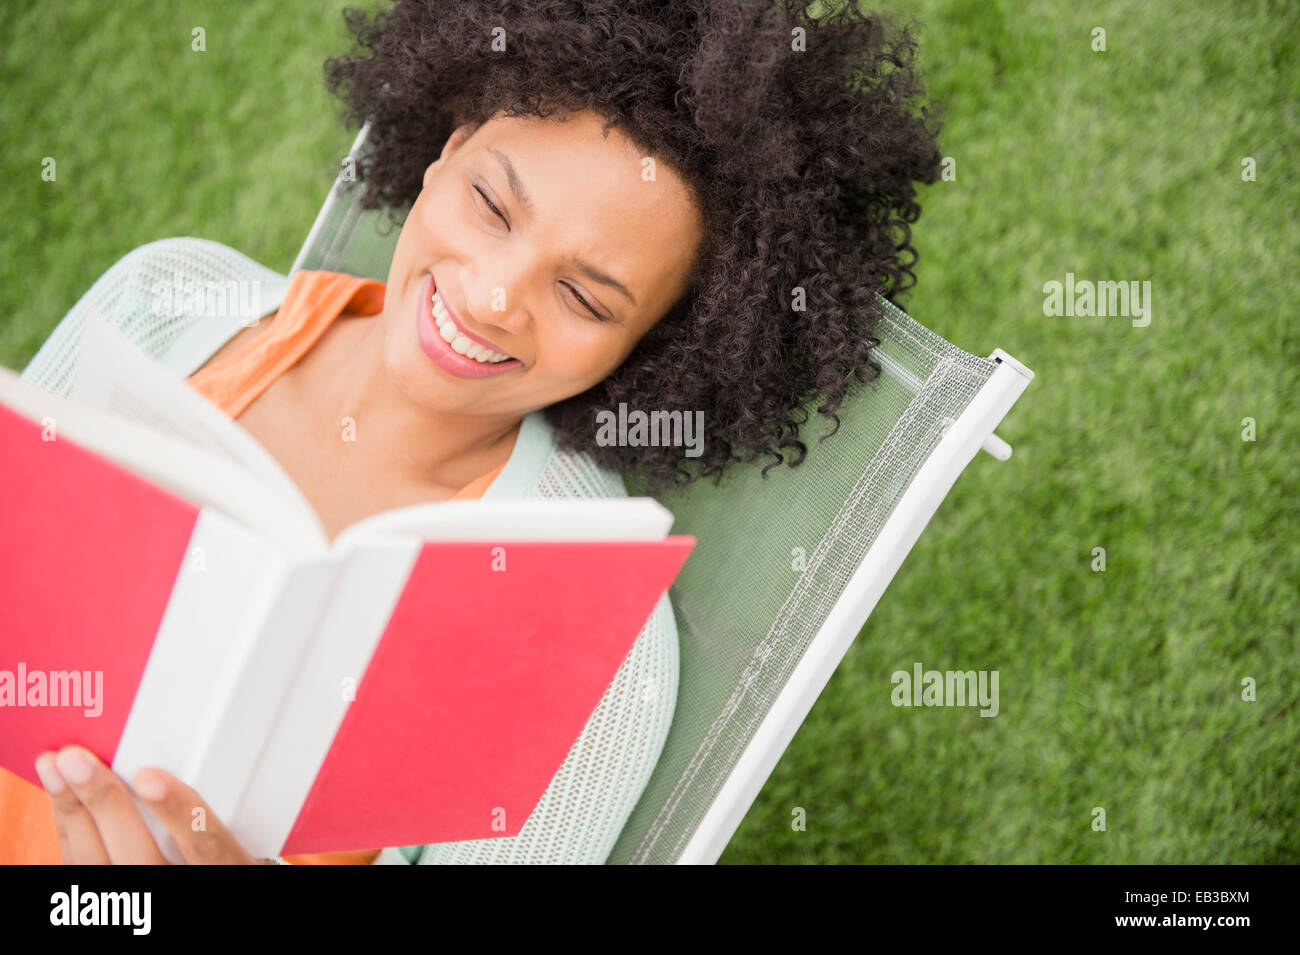 High angle view of woman reading book in chair outdoors Banque D'Images